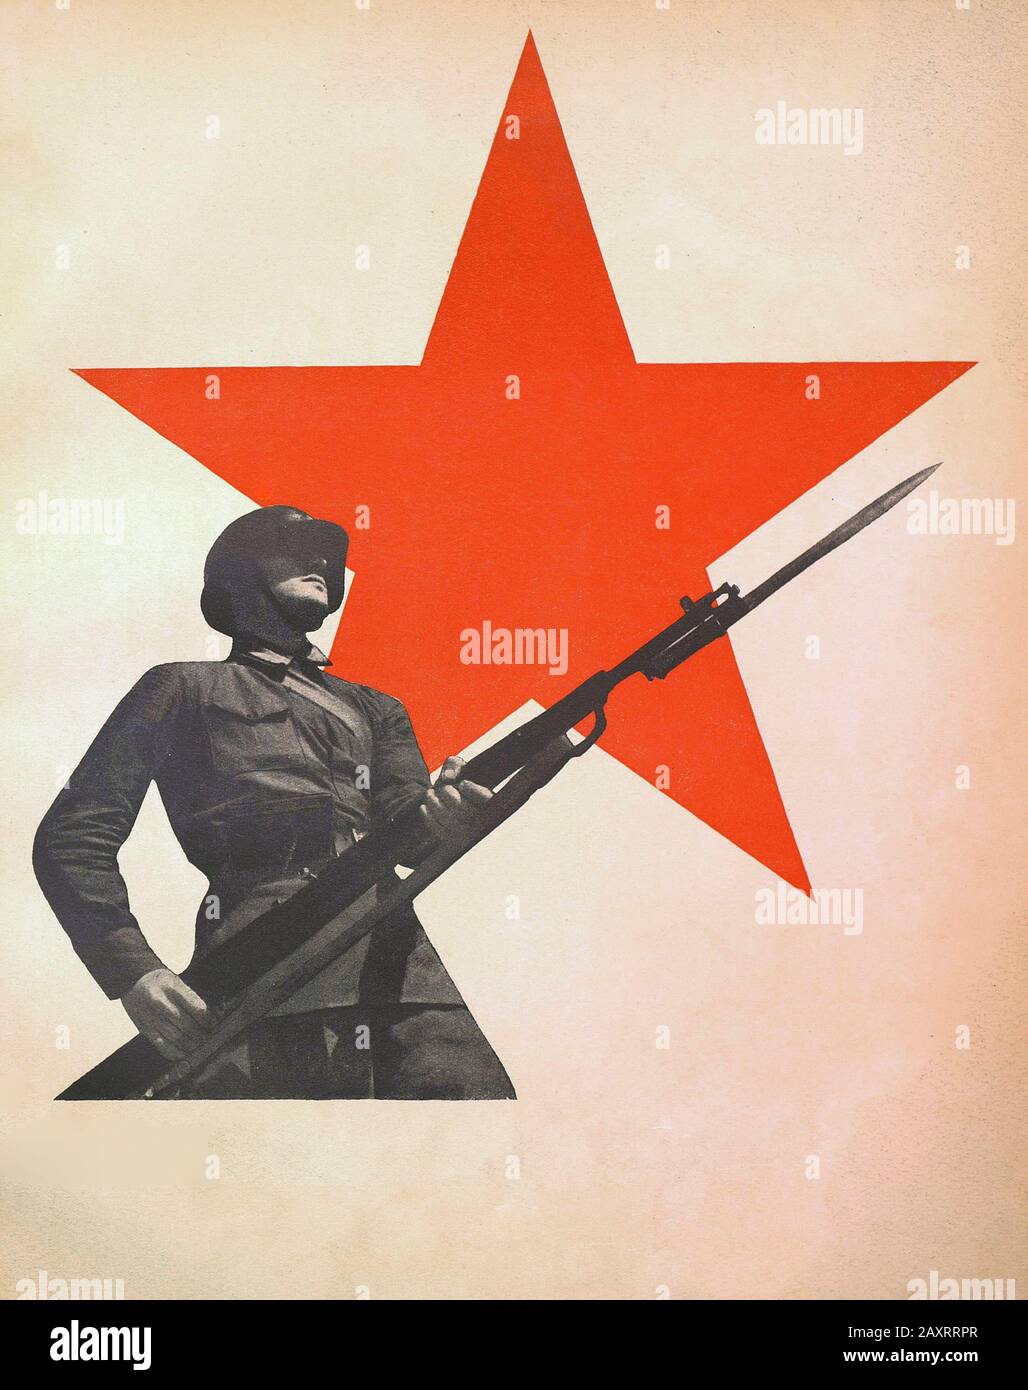 Red Army in 1930s. From soviet propaganda book of 1937. Soviet soldier on the background of a red star. Stock Photo